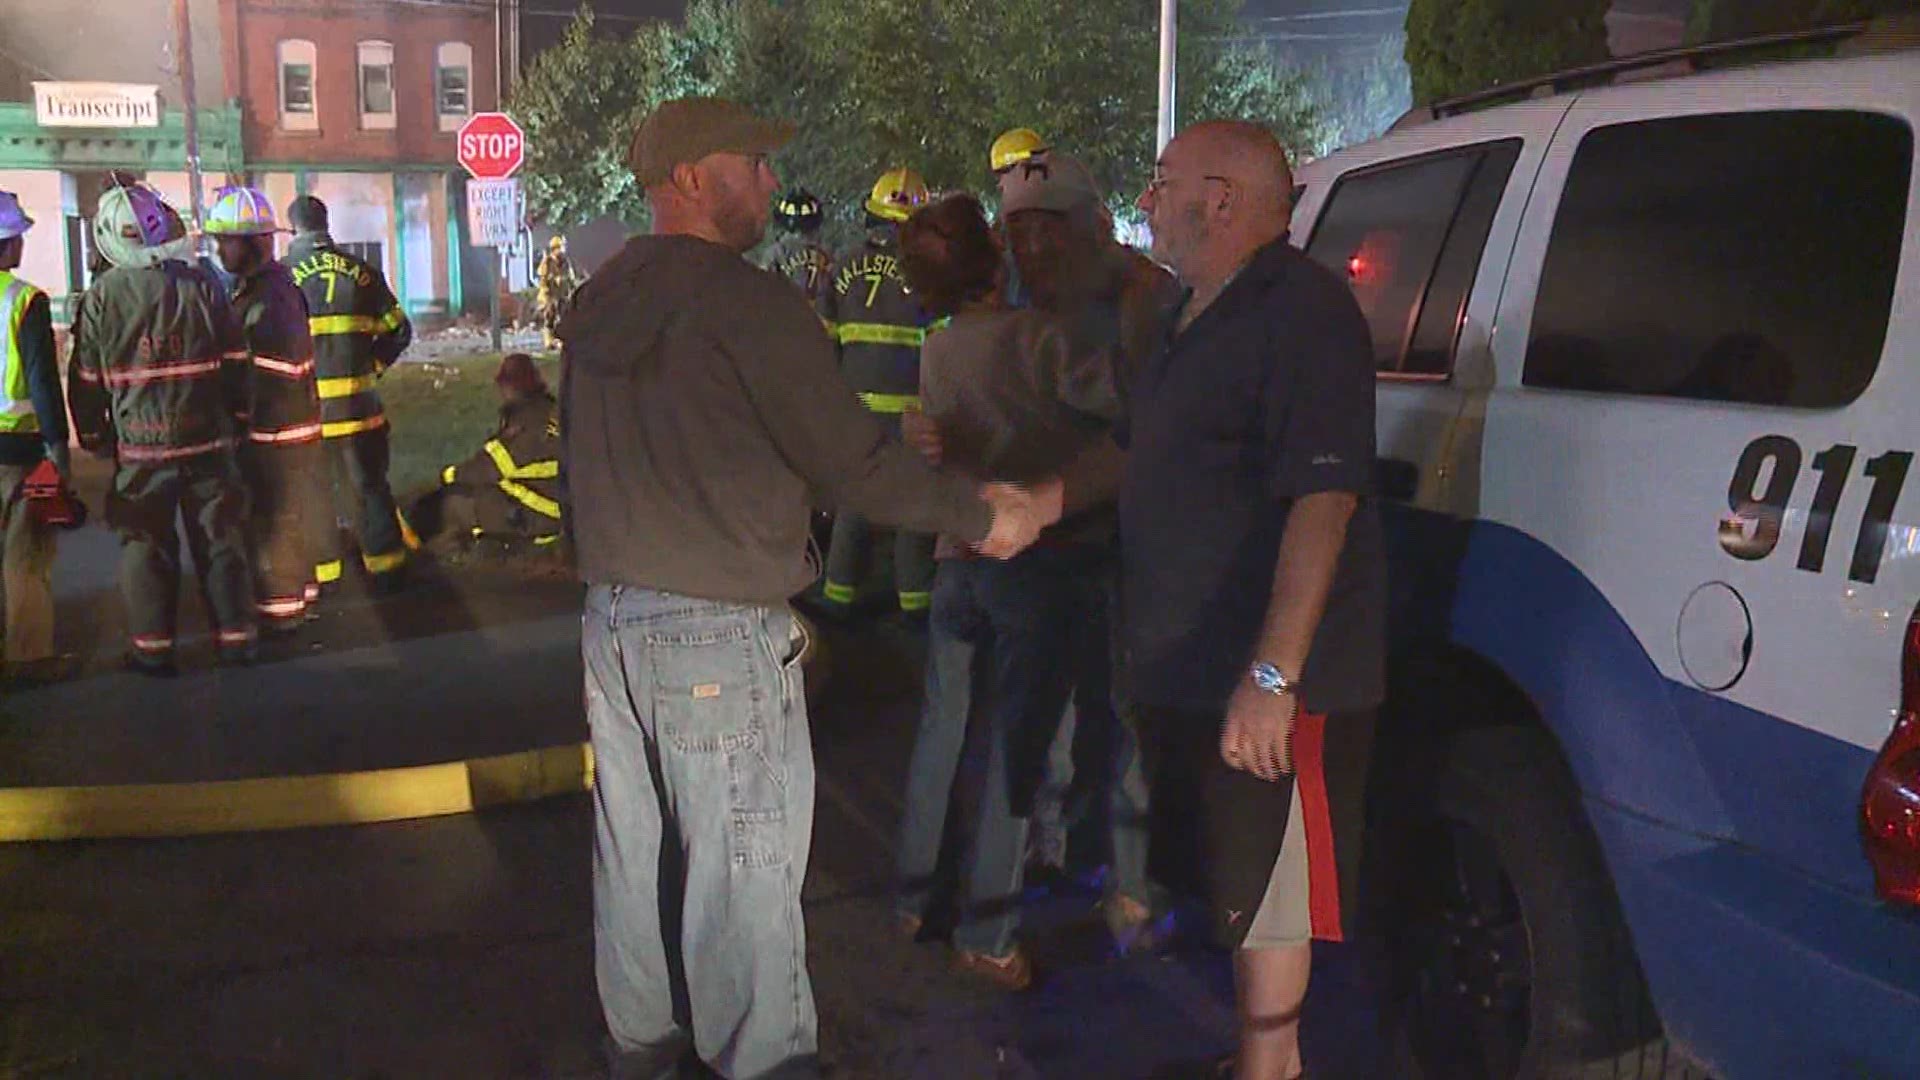 The husband and wife have allegedly set fire to the Susquehanna Transcript building.